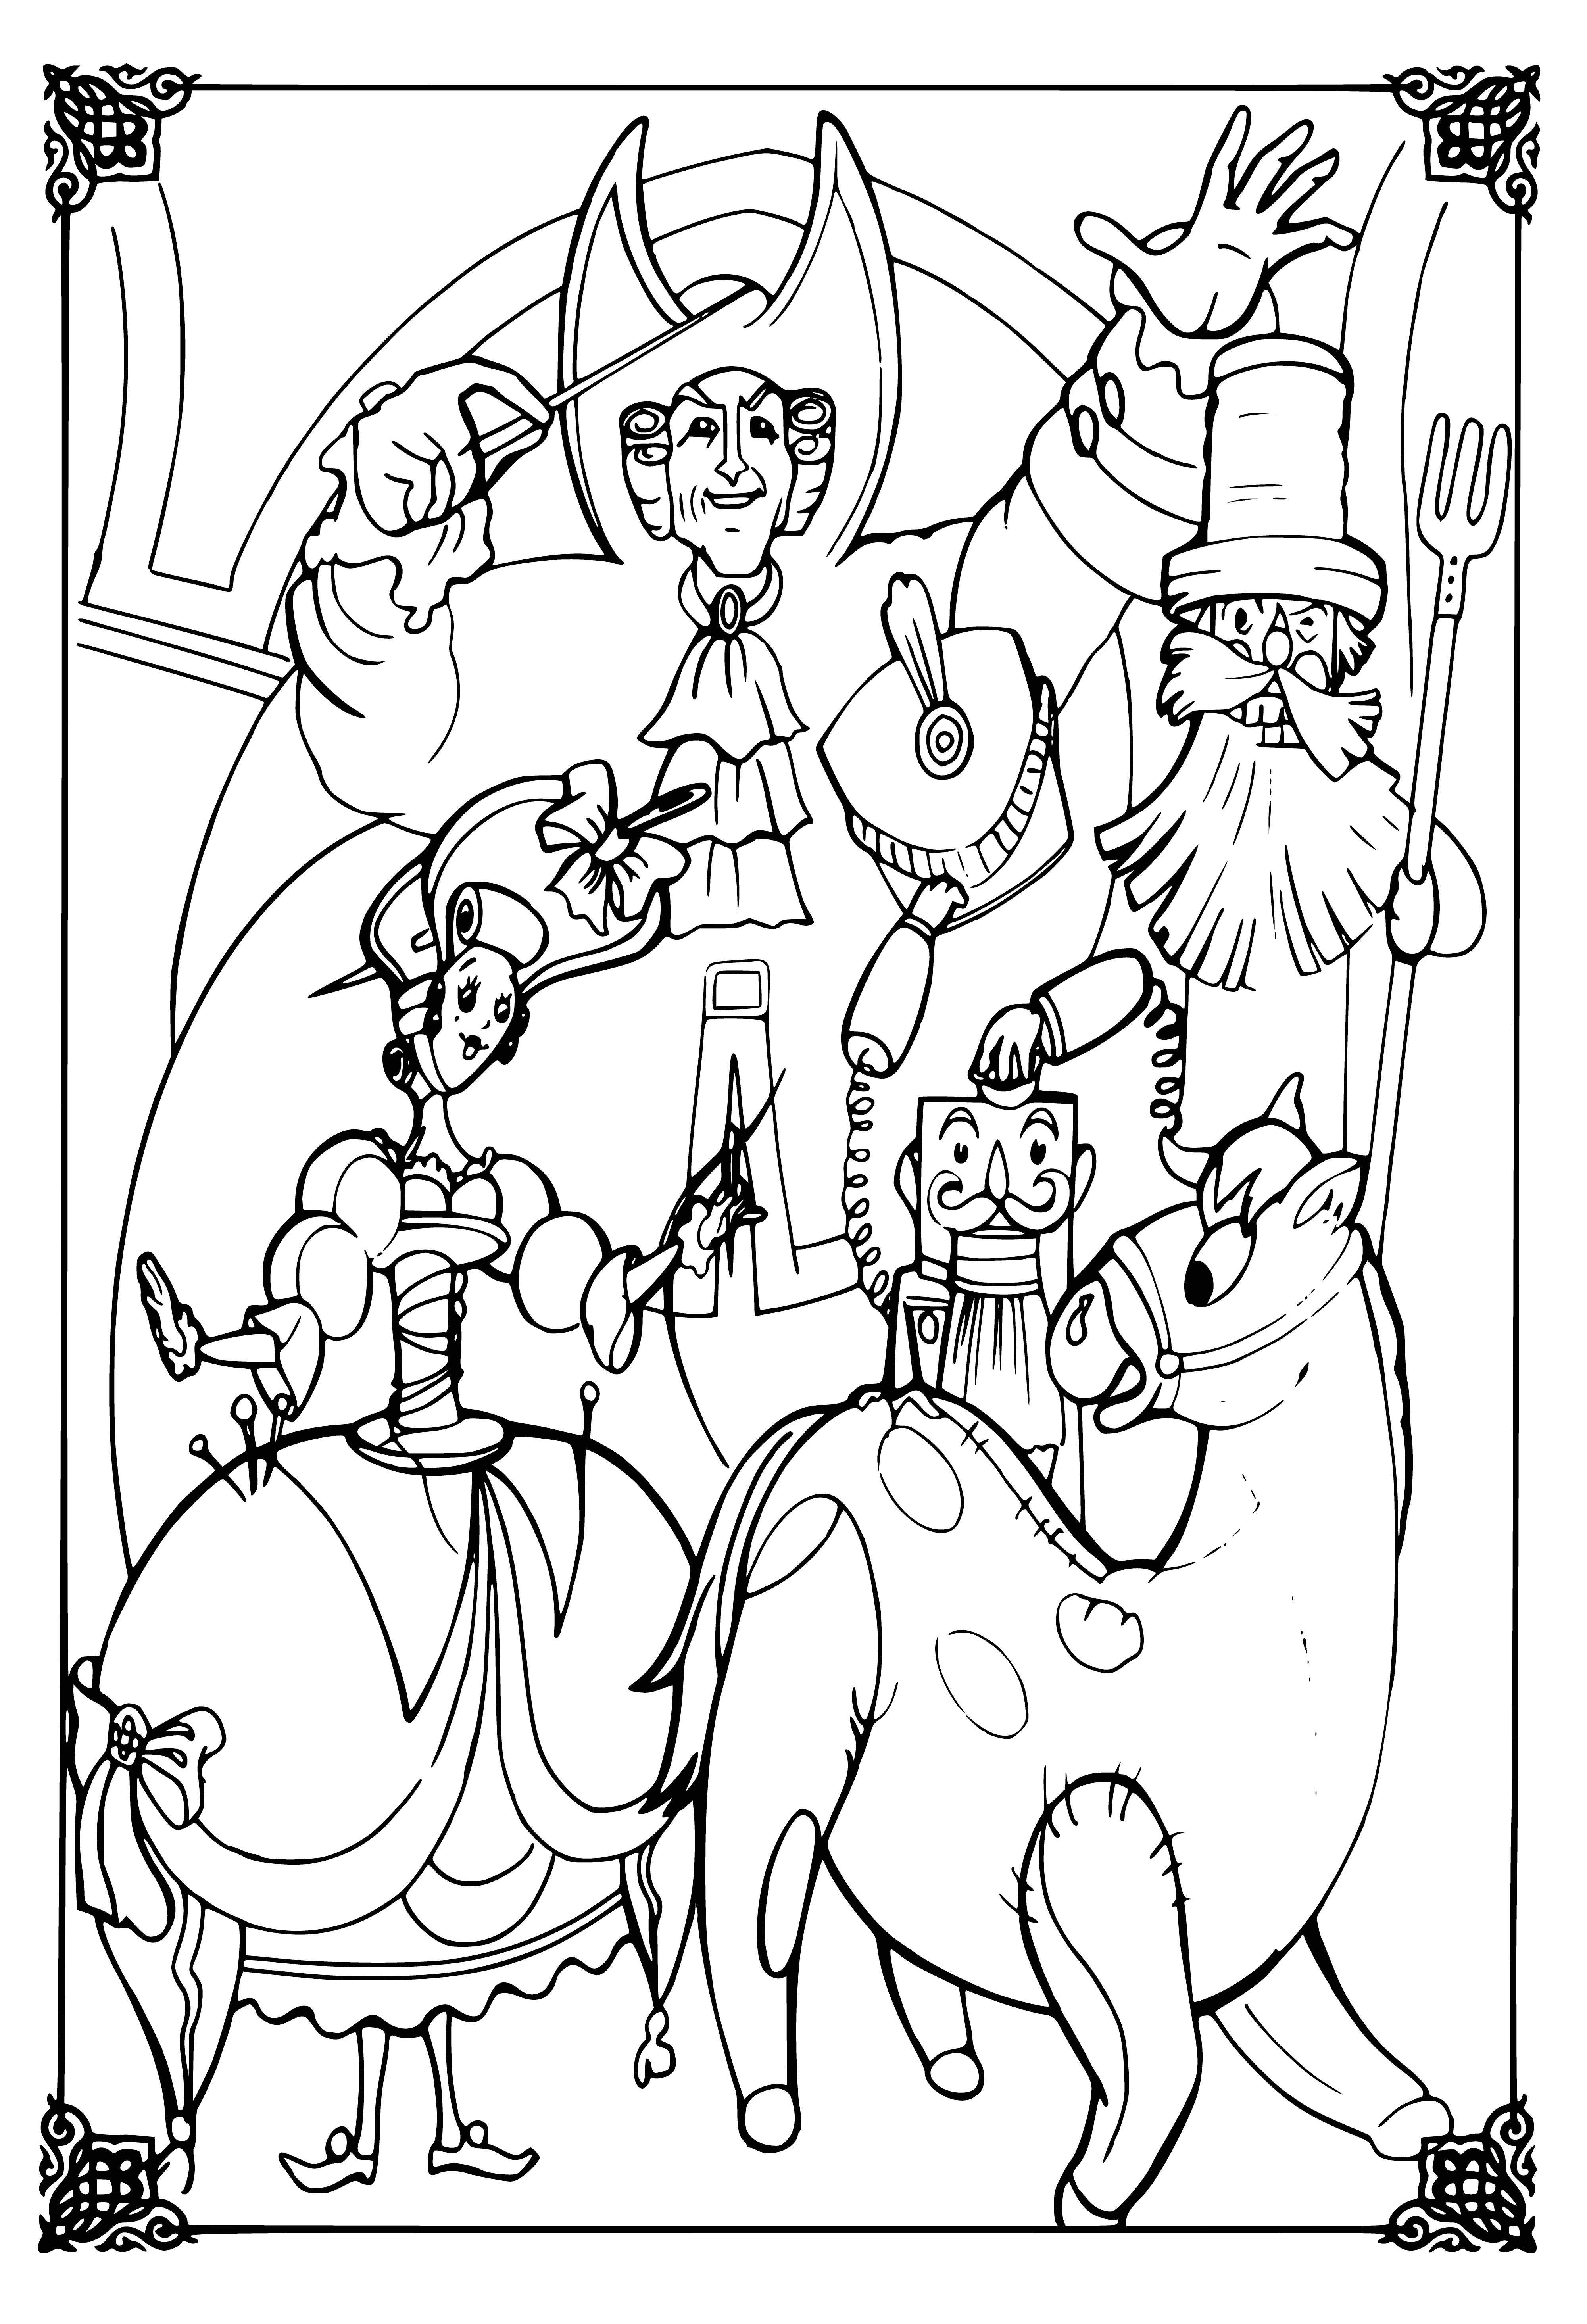 coloring page: Two servants preparing a meal w/ large knives, meat on chopping blocks.